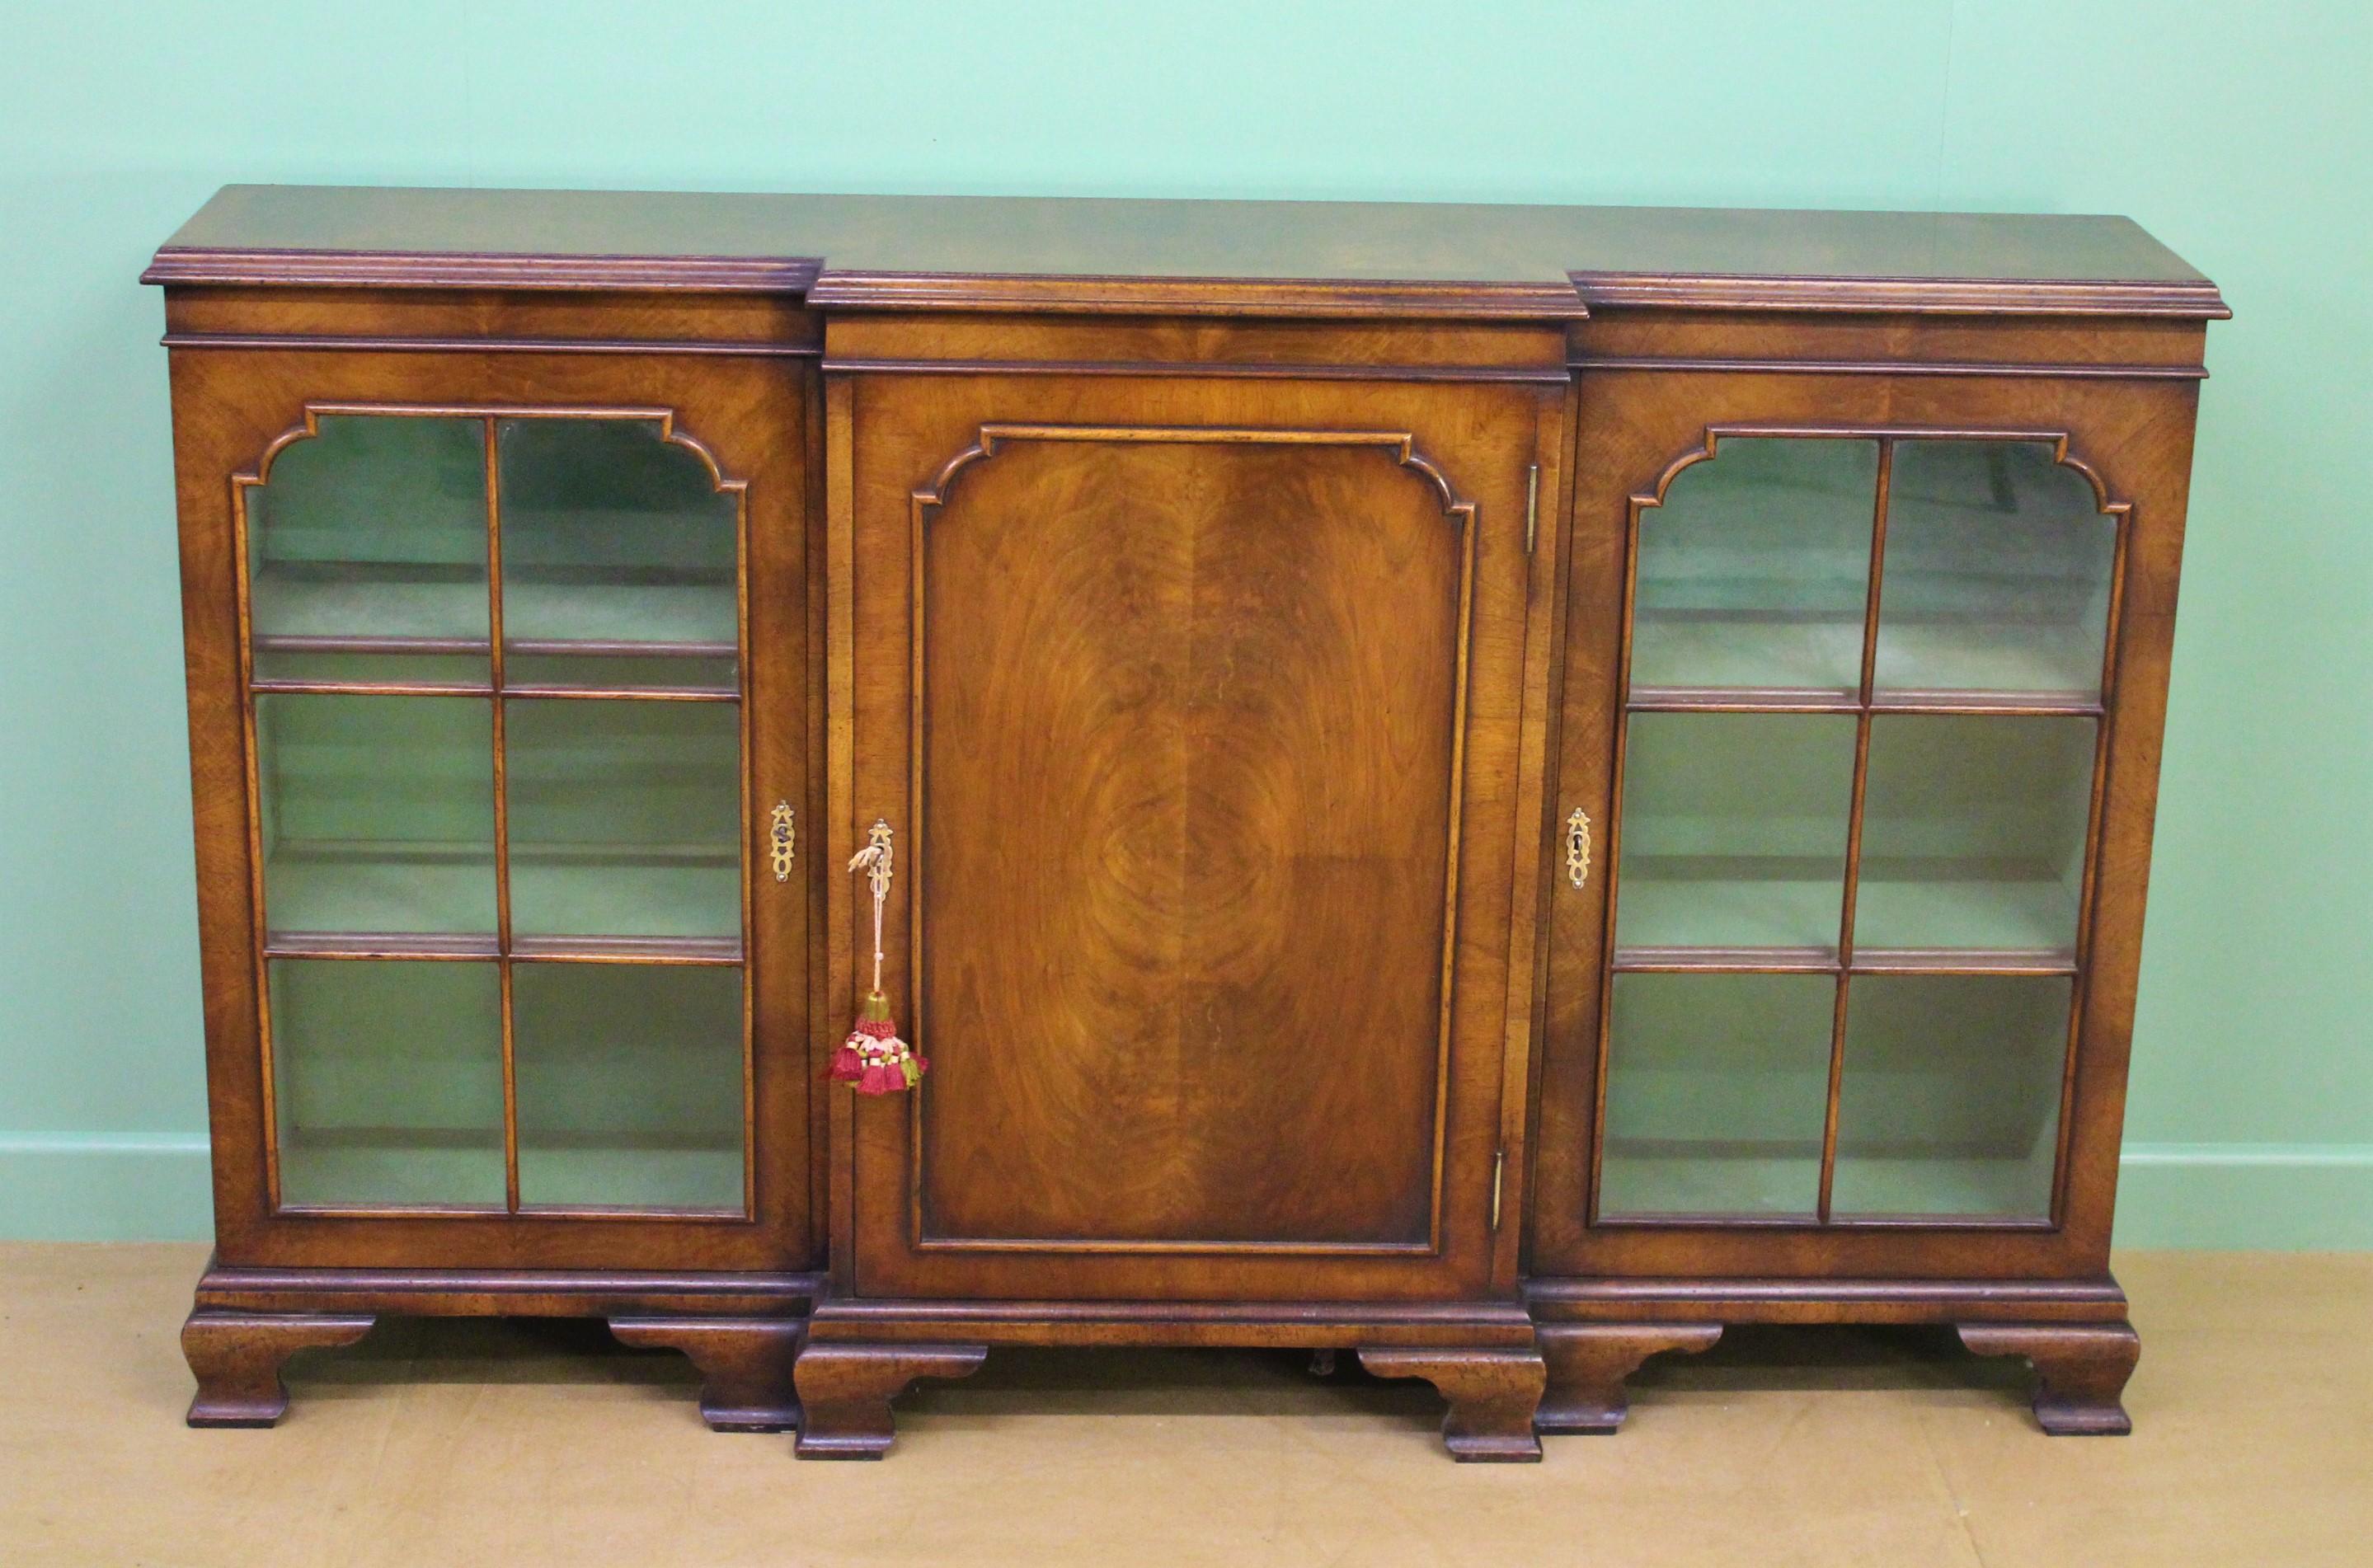 A handsome Georgian style burr walnut breakfront bookcase. Well made in solid walnut with attractive burr walnut veneers onto an oak carcas. The top is cross banded. With a central cupboard door, flanked by a pair of glazed doors. Each door is